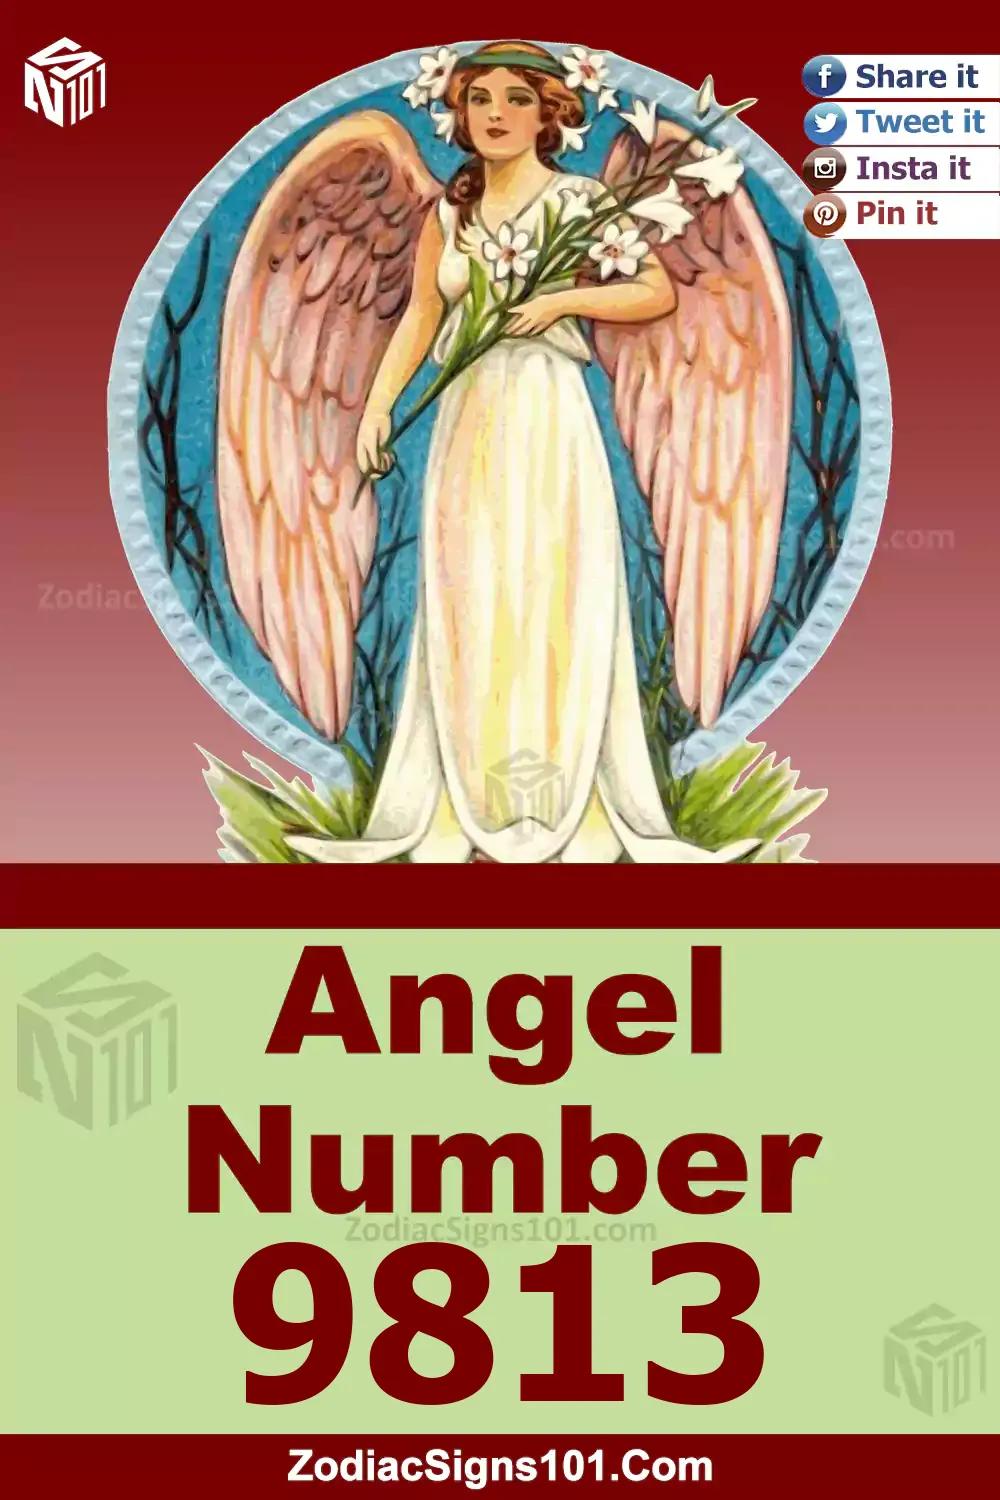 9813 Angel Number Meaning